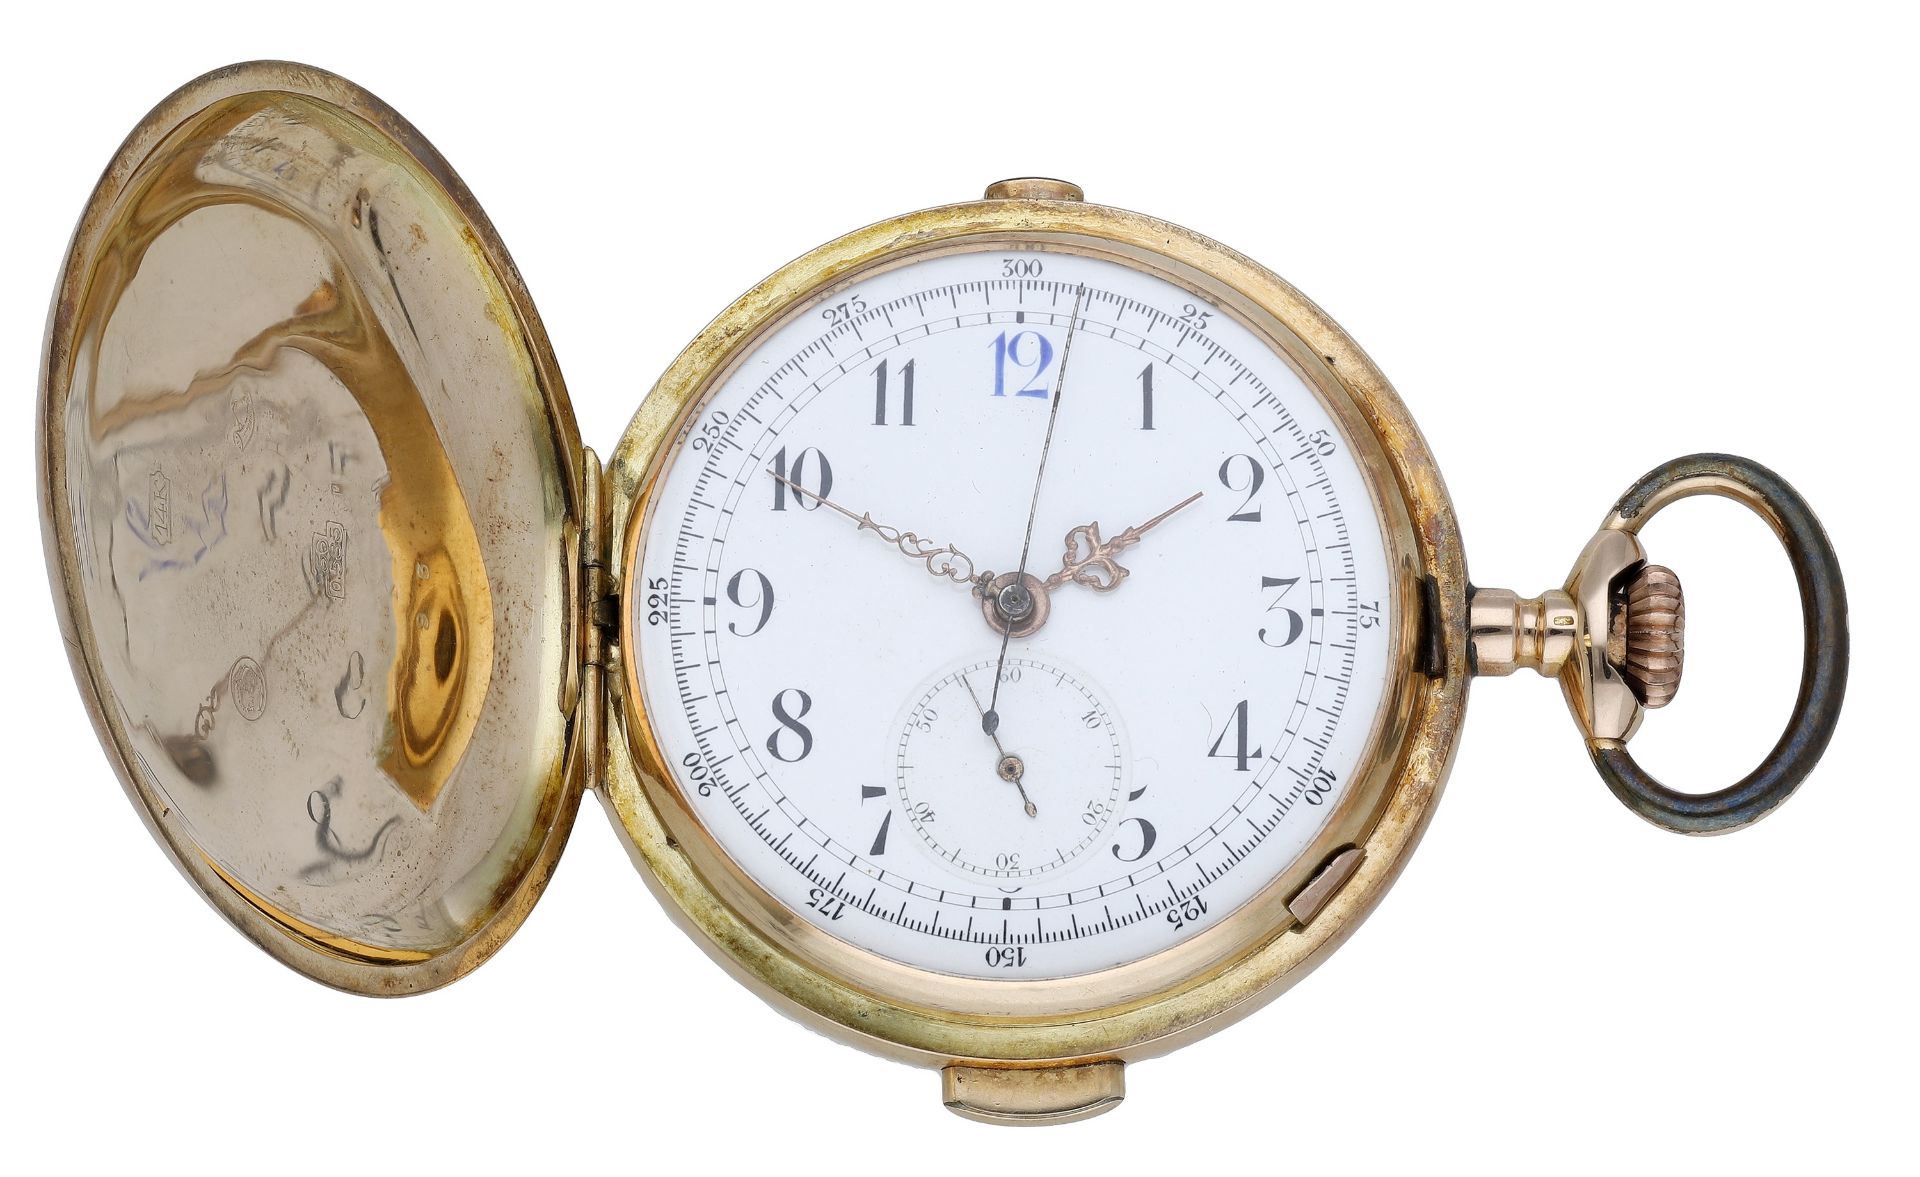 Swiss. A gold hunting cased minute repeating keyless watch with chronograph, circa 1900. Mo...